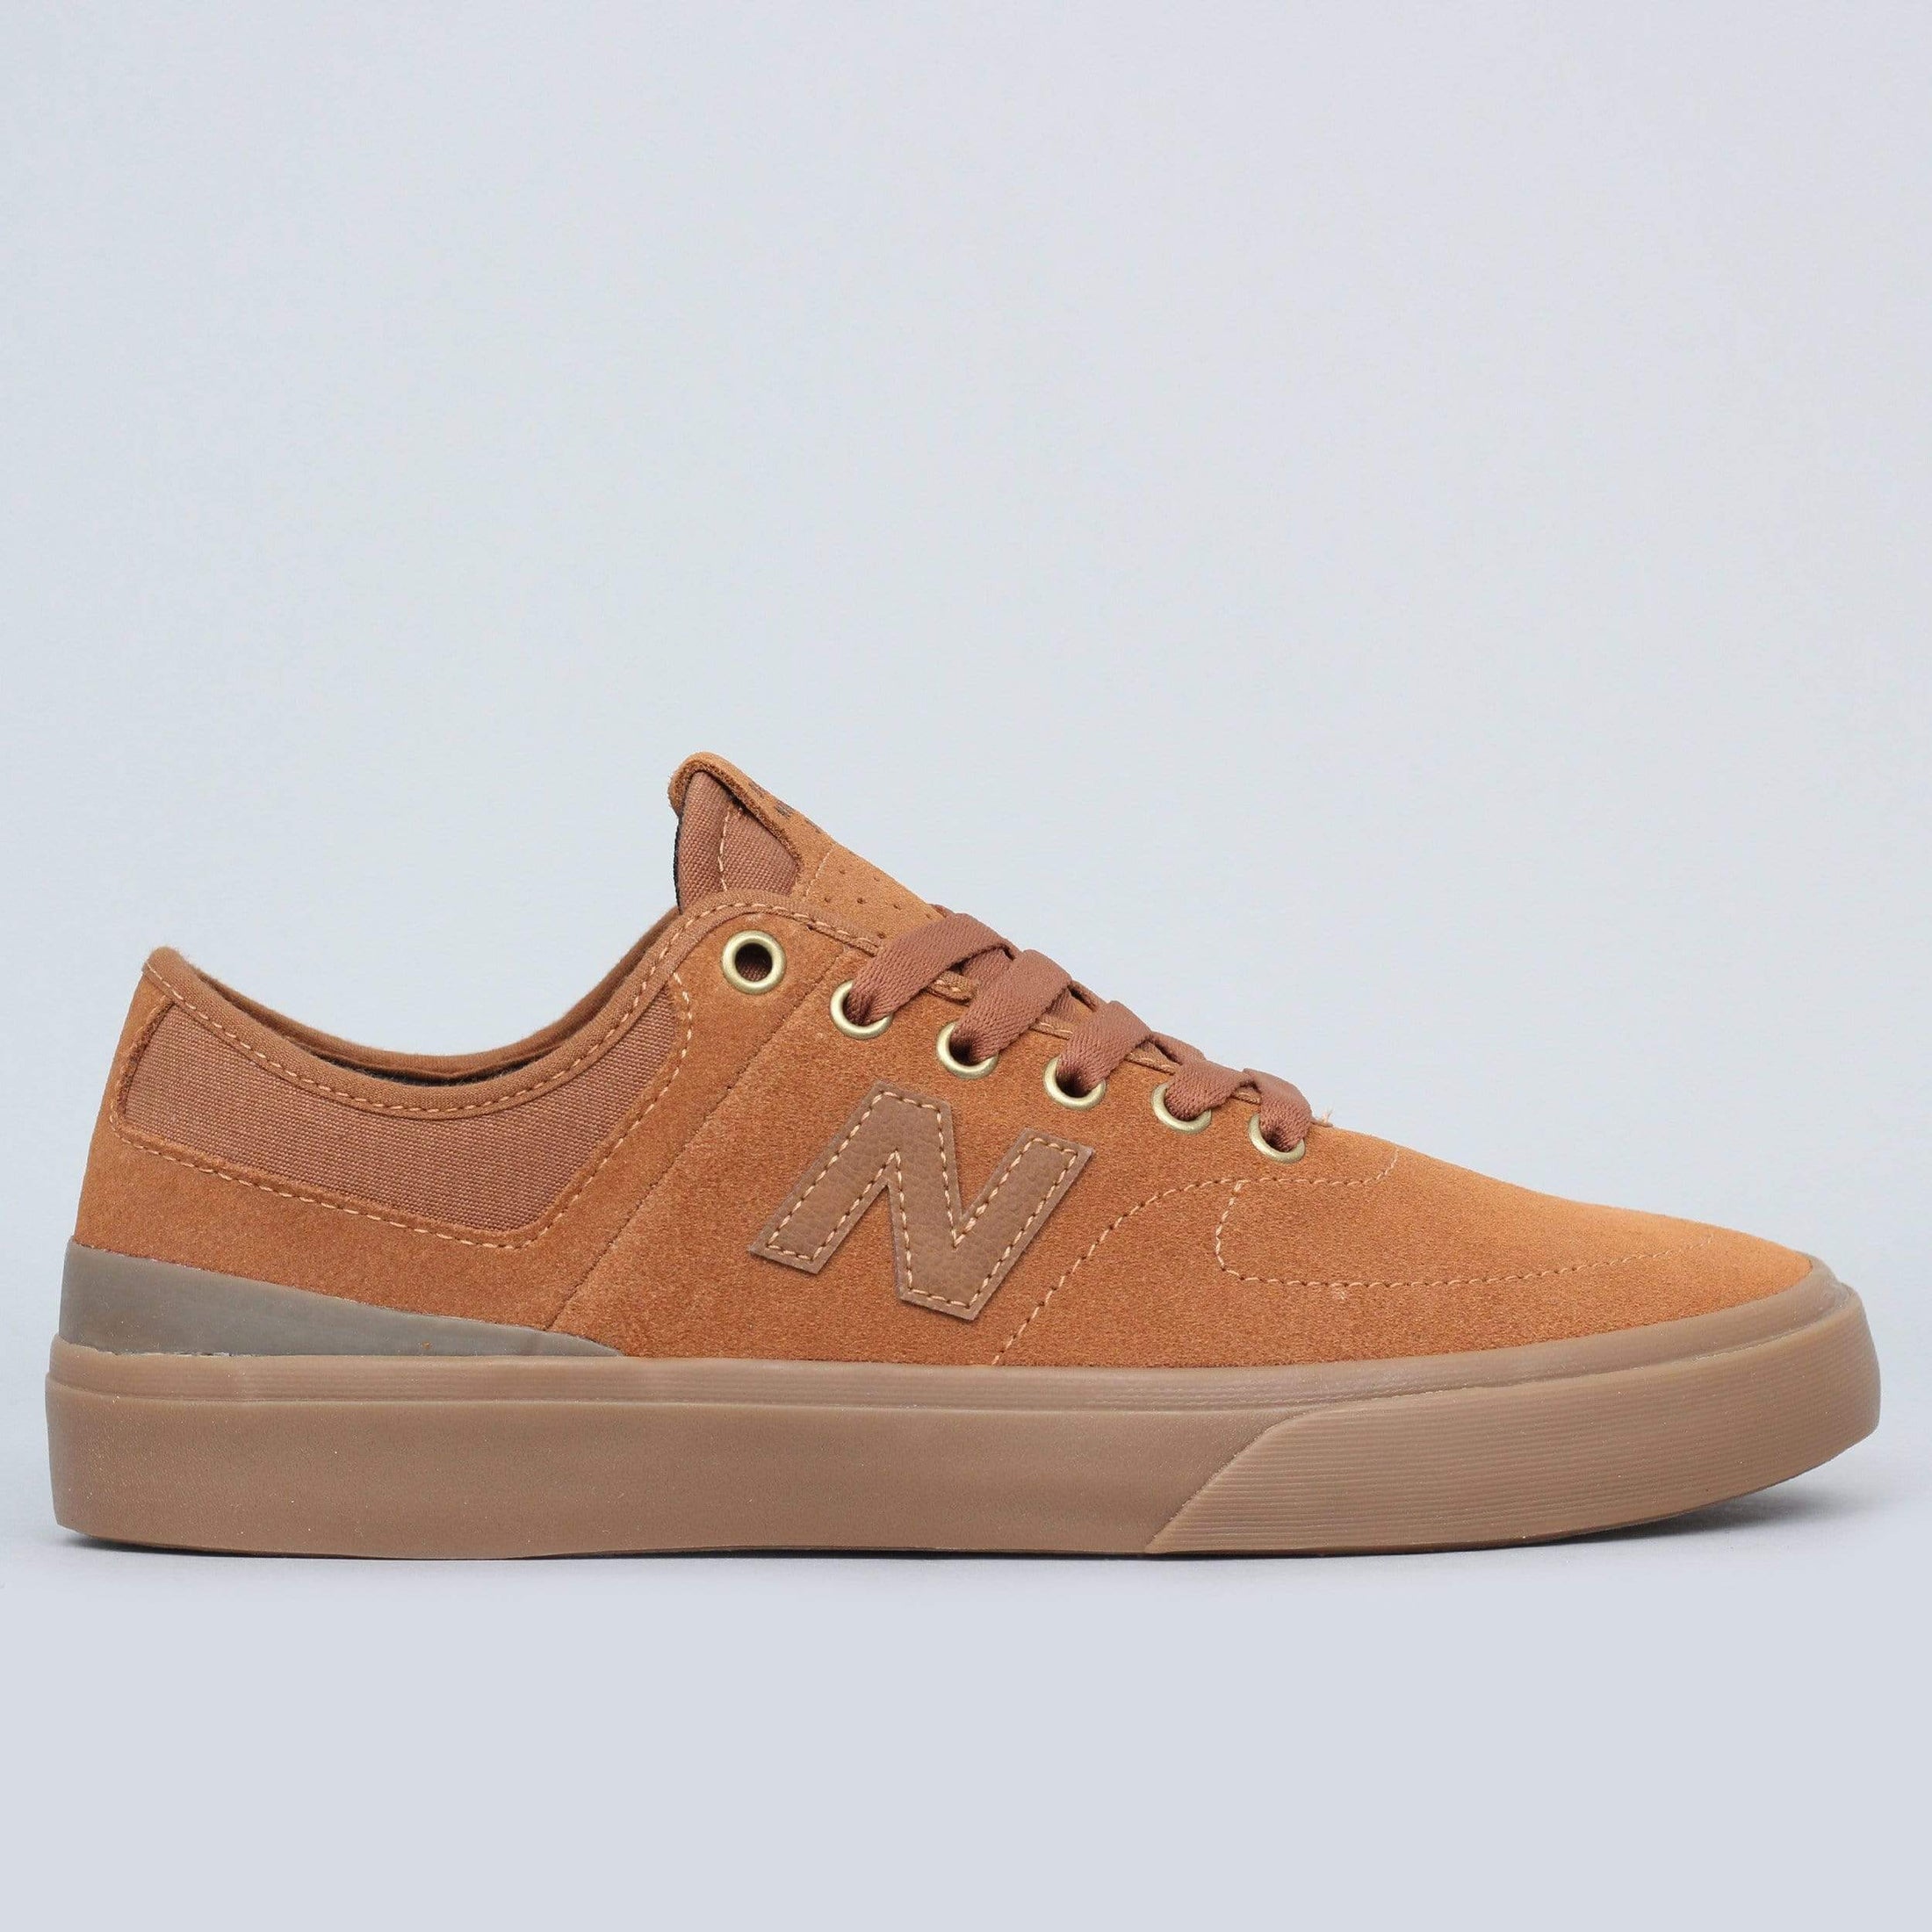 New Balance NM379 Shoes Brown / Gum - Jake Hayes